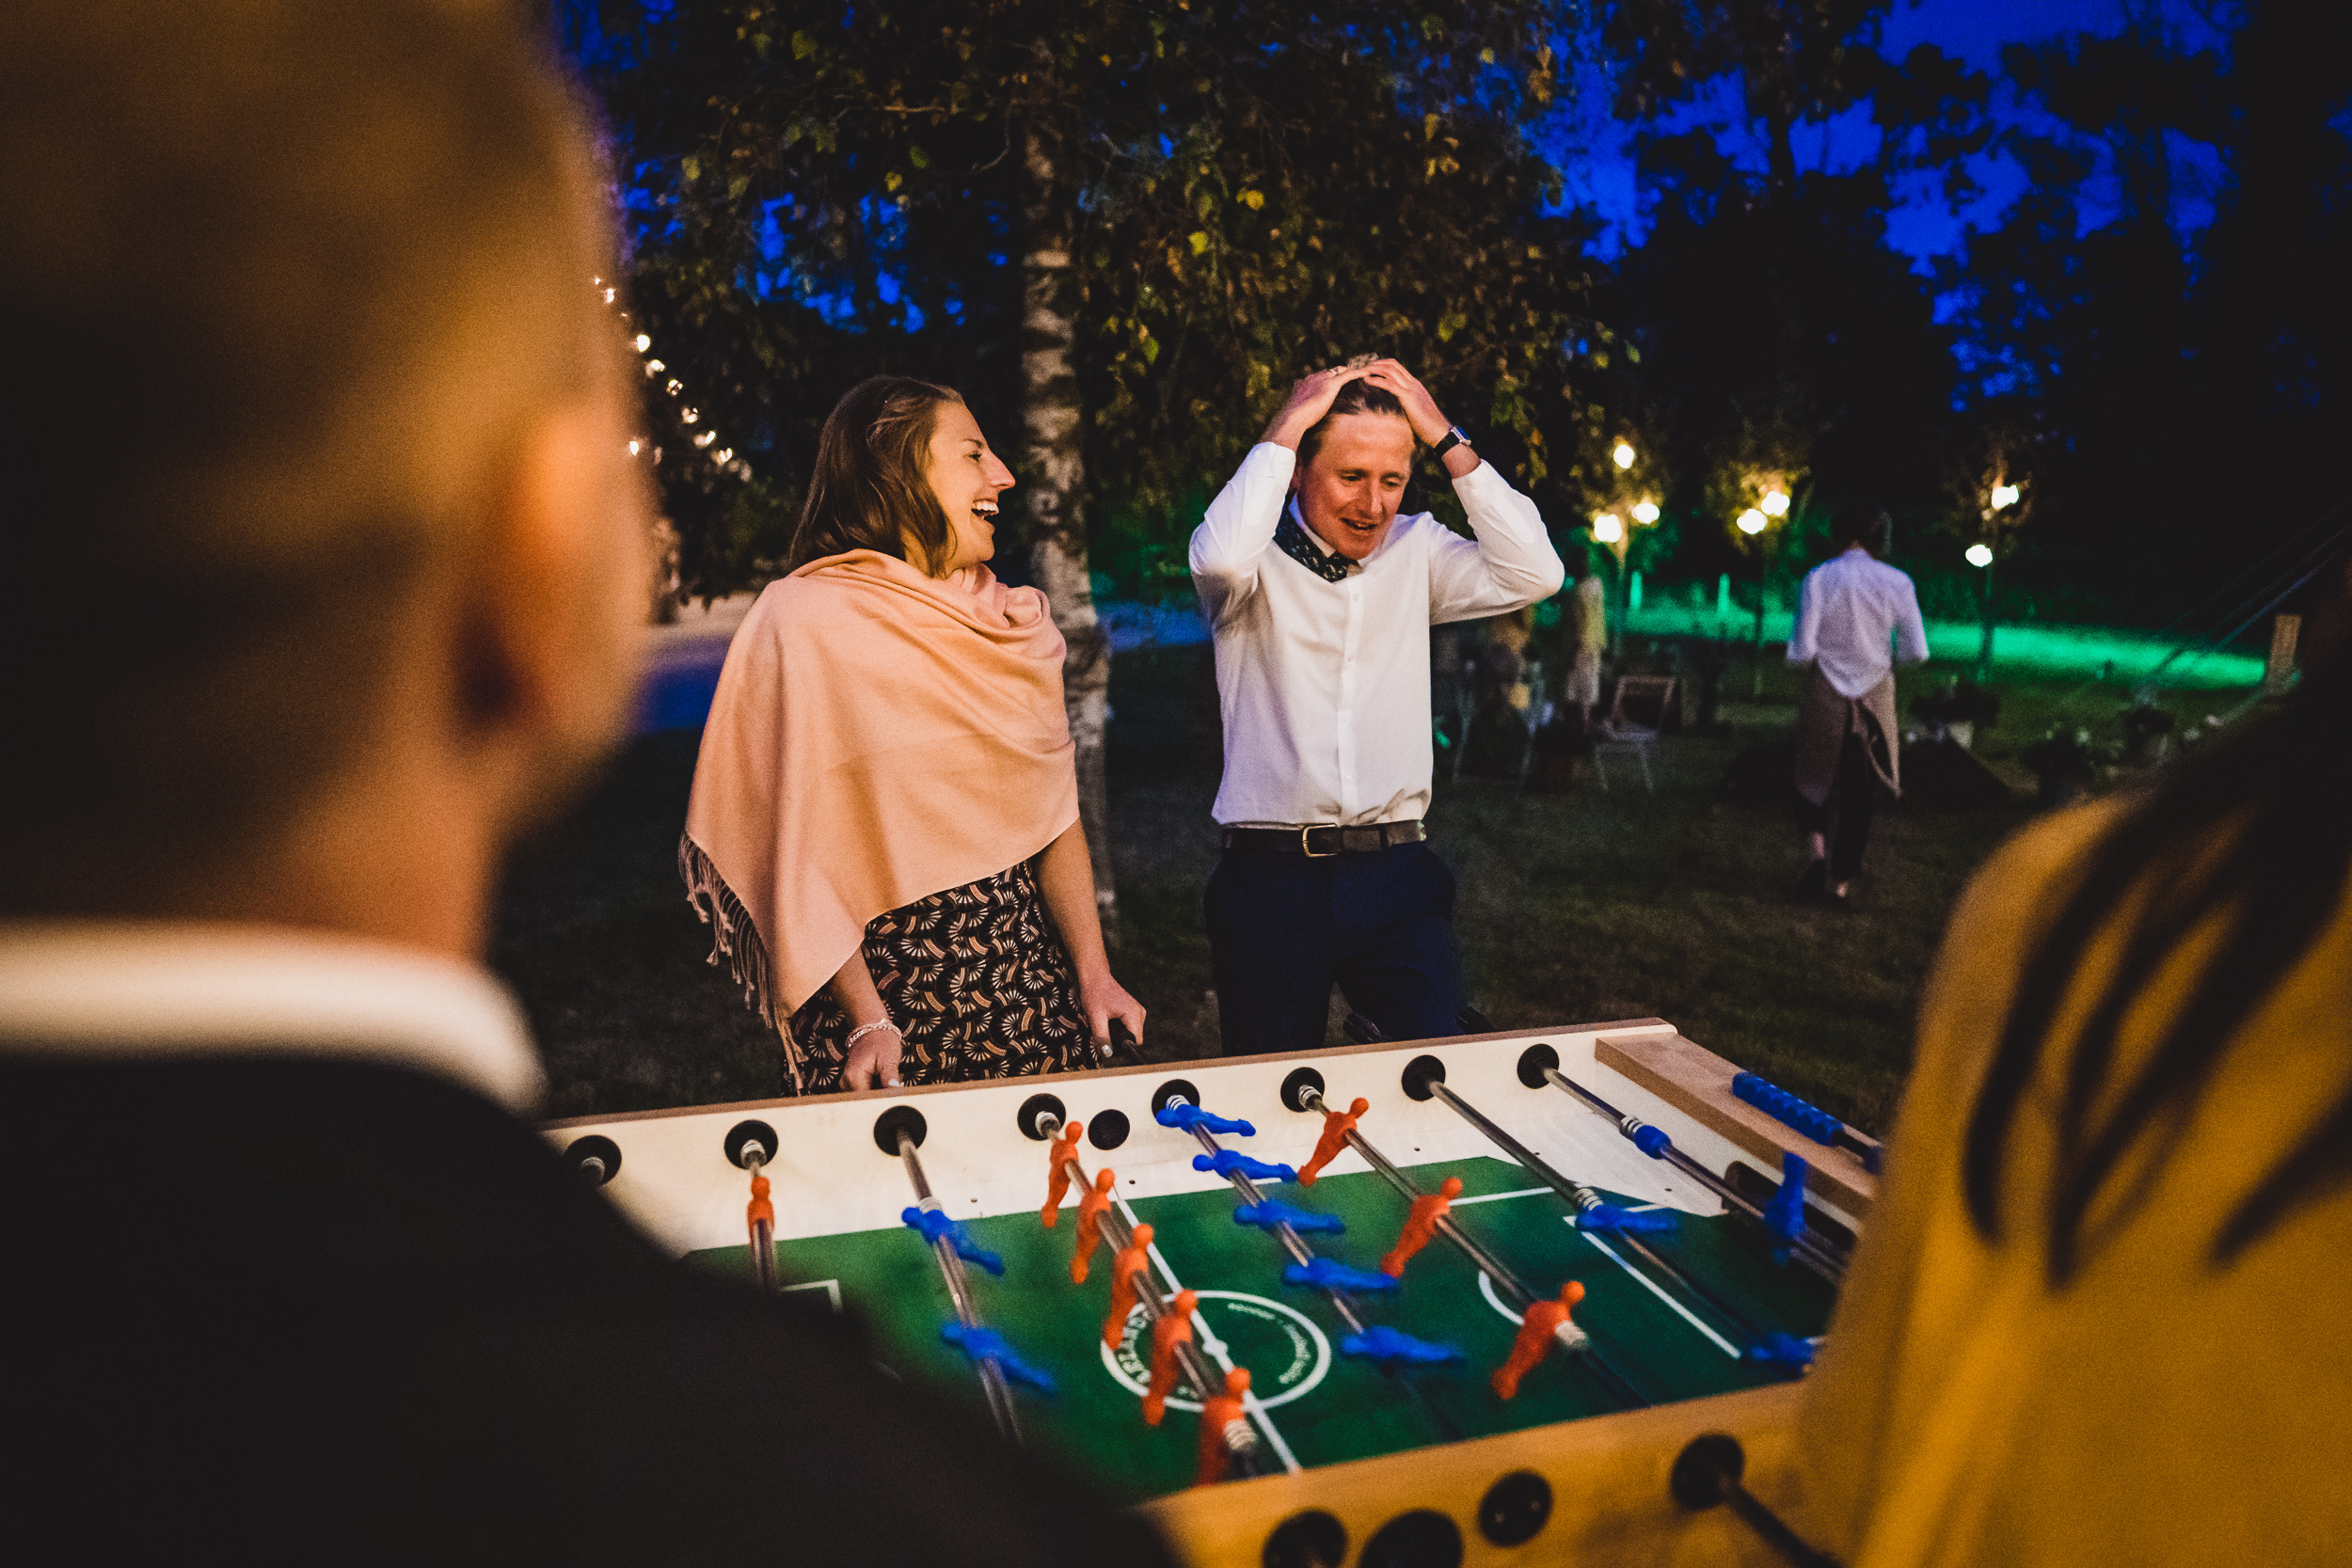 A bride and her wedding photographer capture a lively group playing foosball at the wedding.